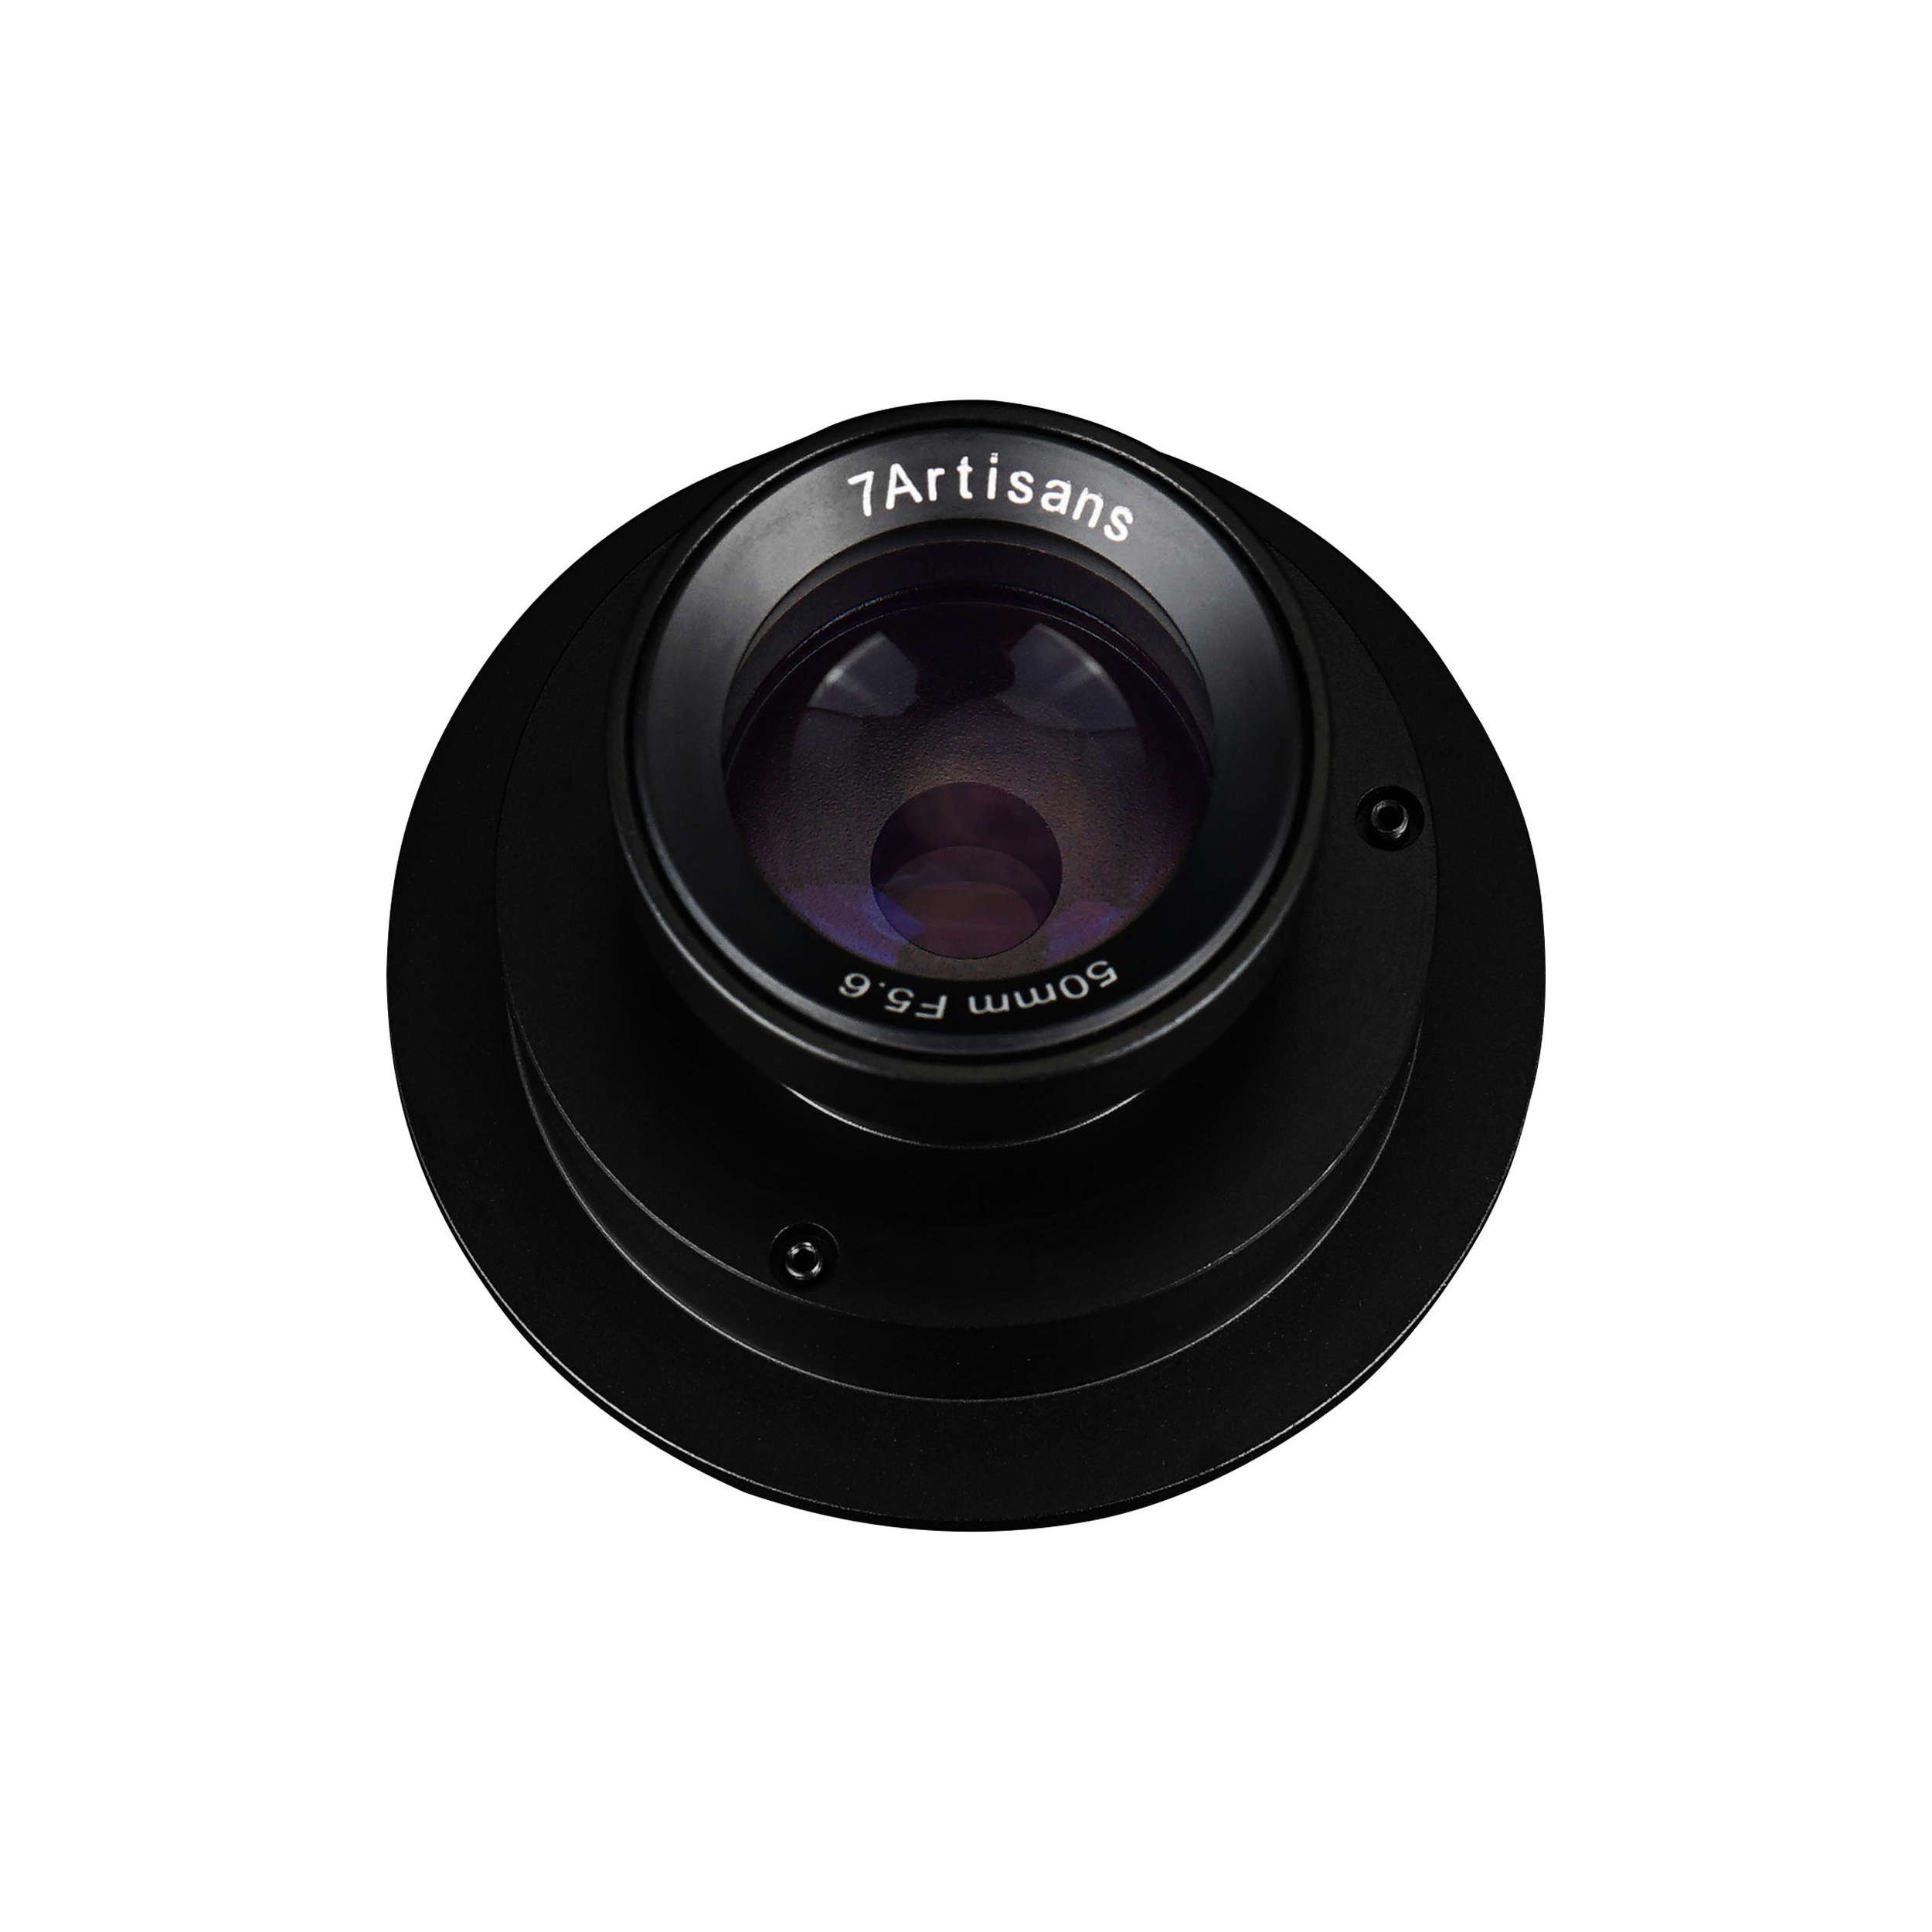 7artisans Photoelectric 50mm f/5.6 Half-Frame Lens for Drone Photography for Sony E-Mount